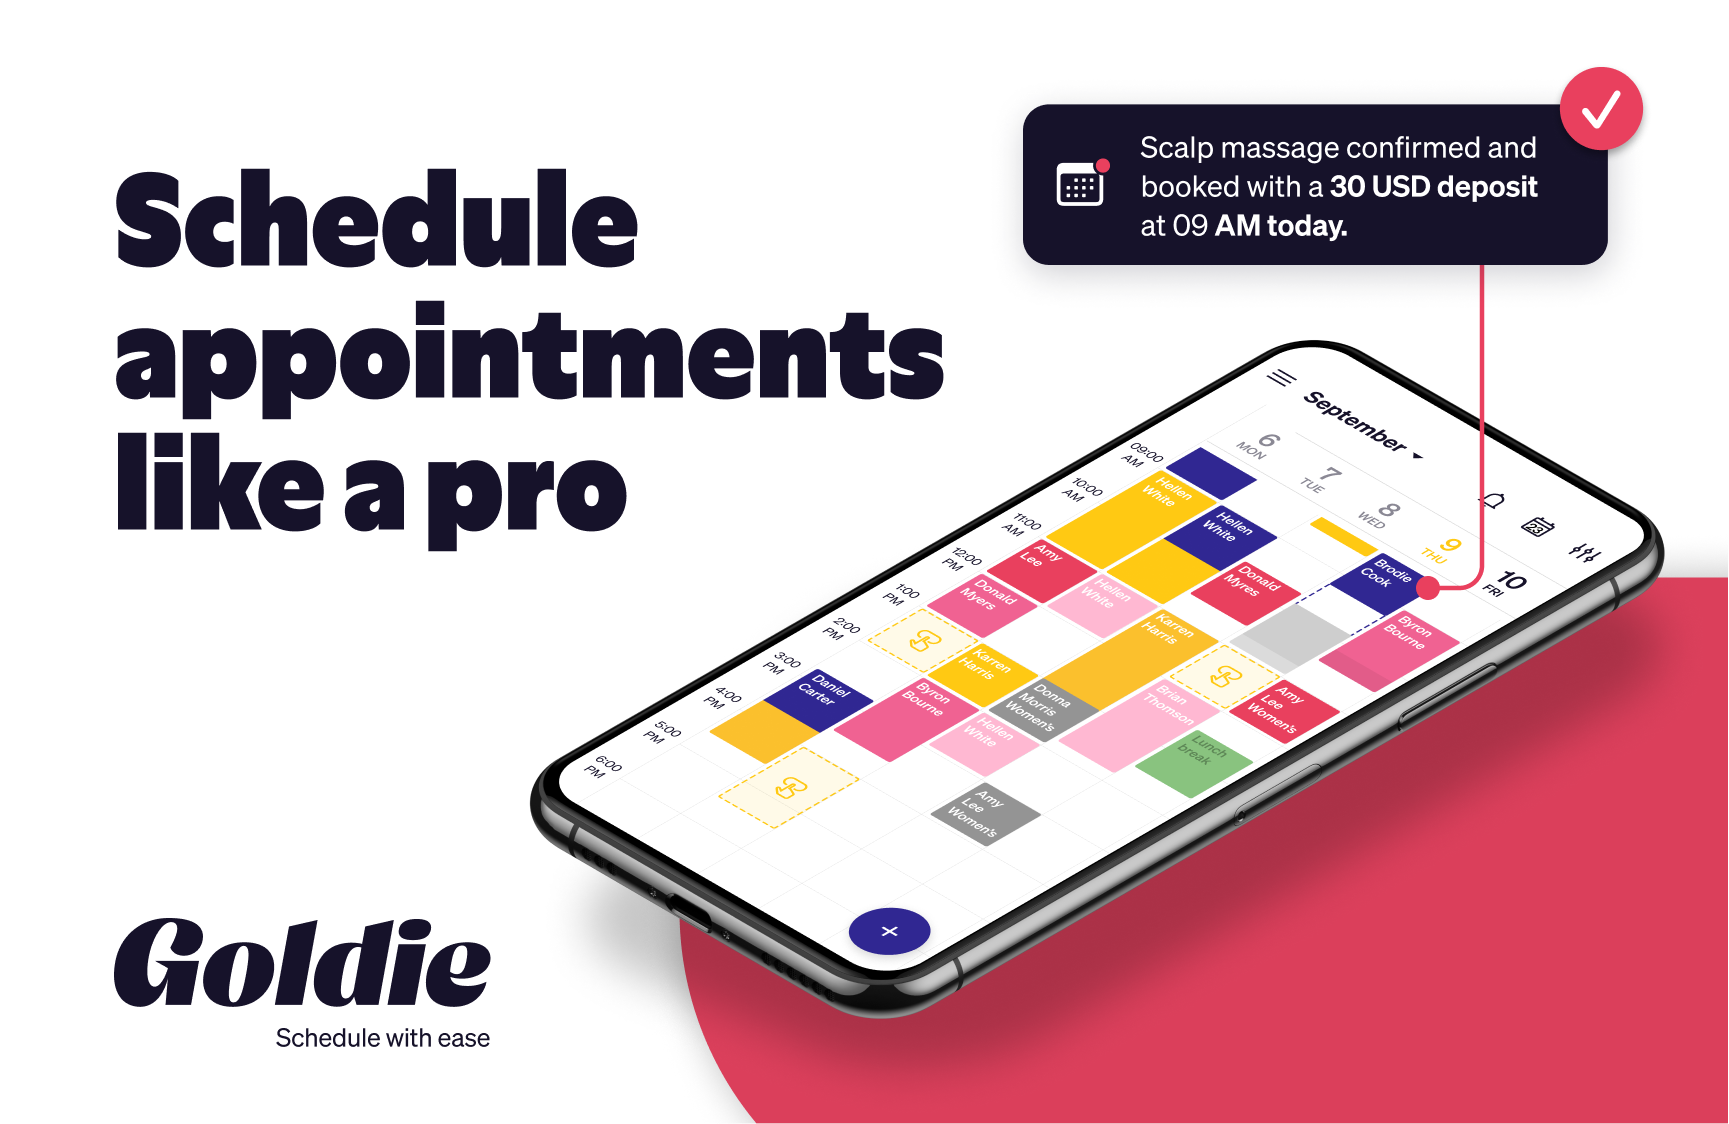 Appointment scheduling. Manage your schedule and keep your business organized with a single app.  Easily sync with other calendars (such as Apple/Google) to manage all of your commitments. Optimize your time and make the most of every day with Goldie.